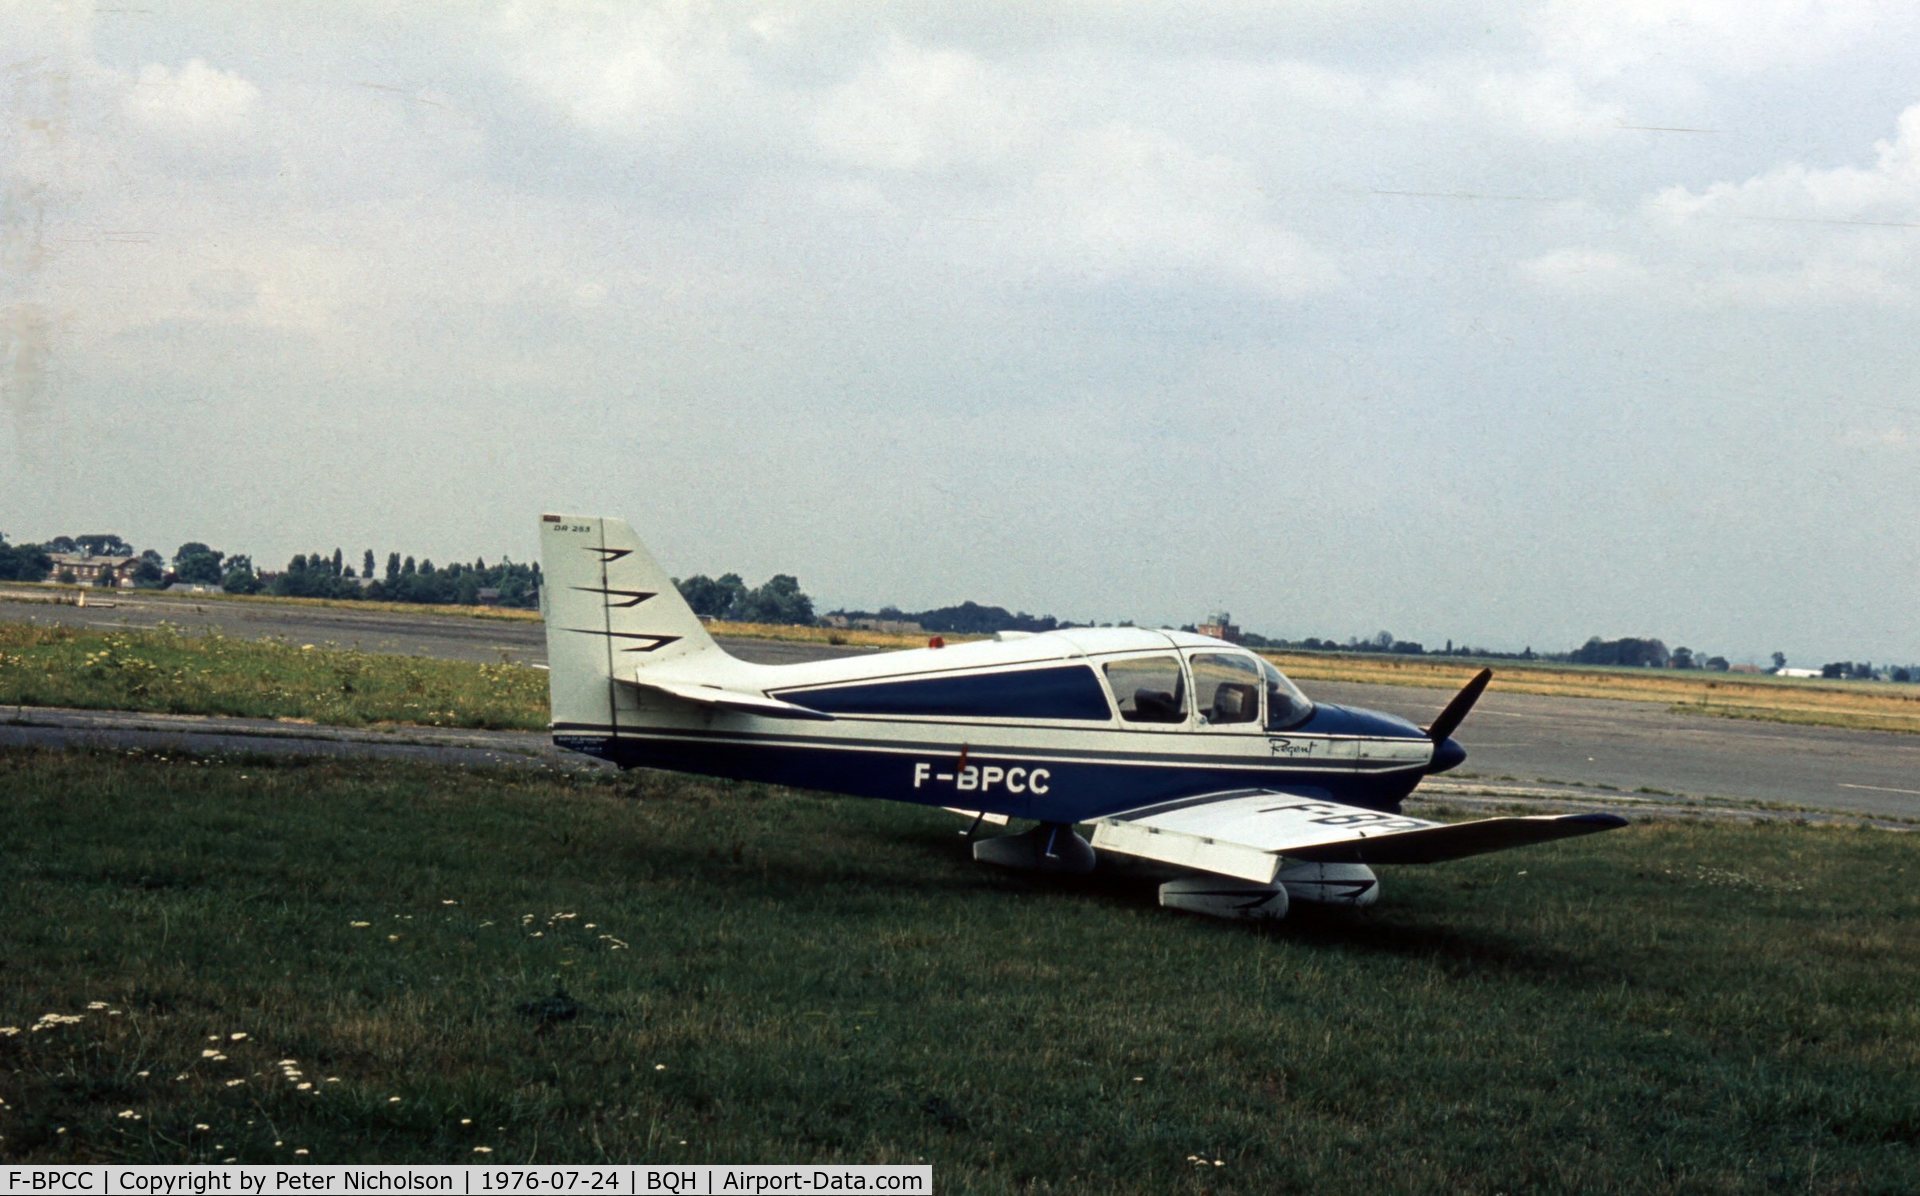 F-BPCC, Jodel DR-253 Regent C/N 109, This Regent was a visitor to Biggin Hill in the Summer of 1976.